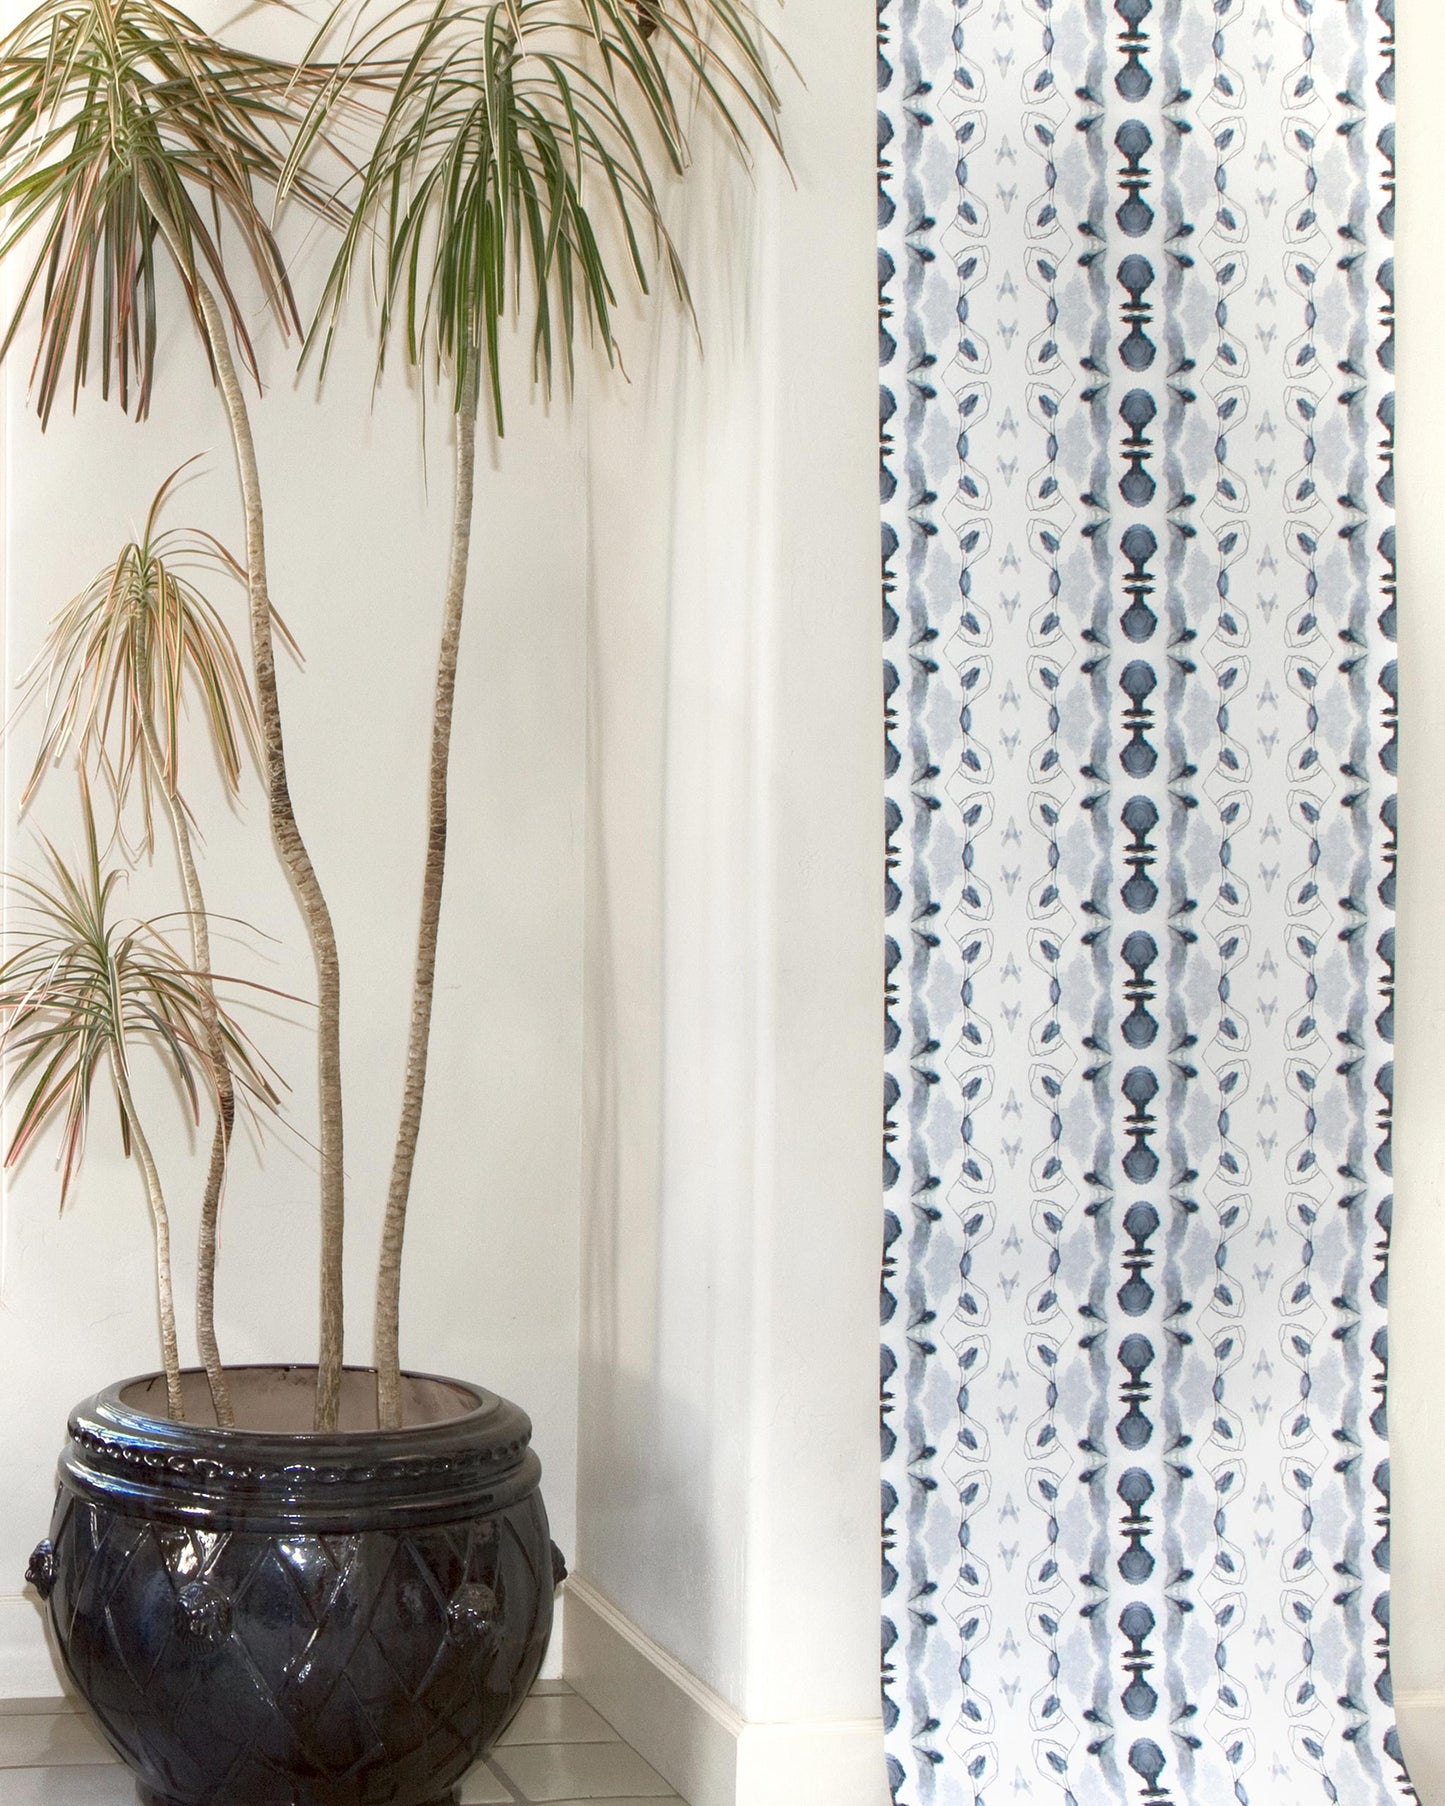 A white Bali Stripe Wallpaper||Indigo wall hanging with Indigo aesthetic and a plant in front of it.